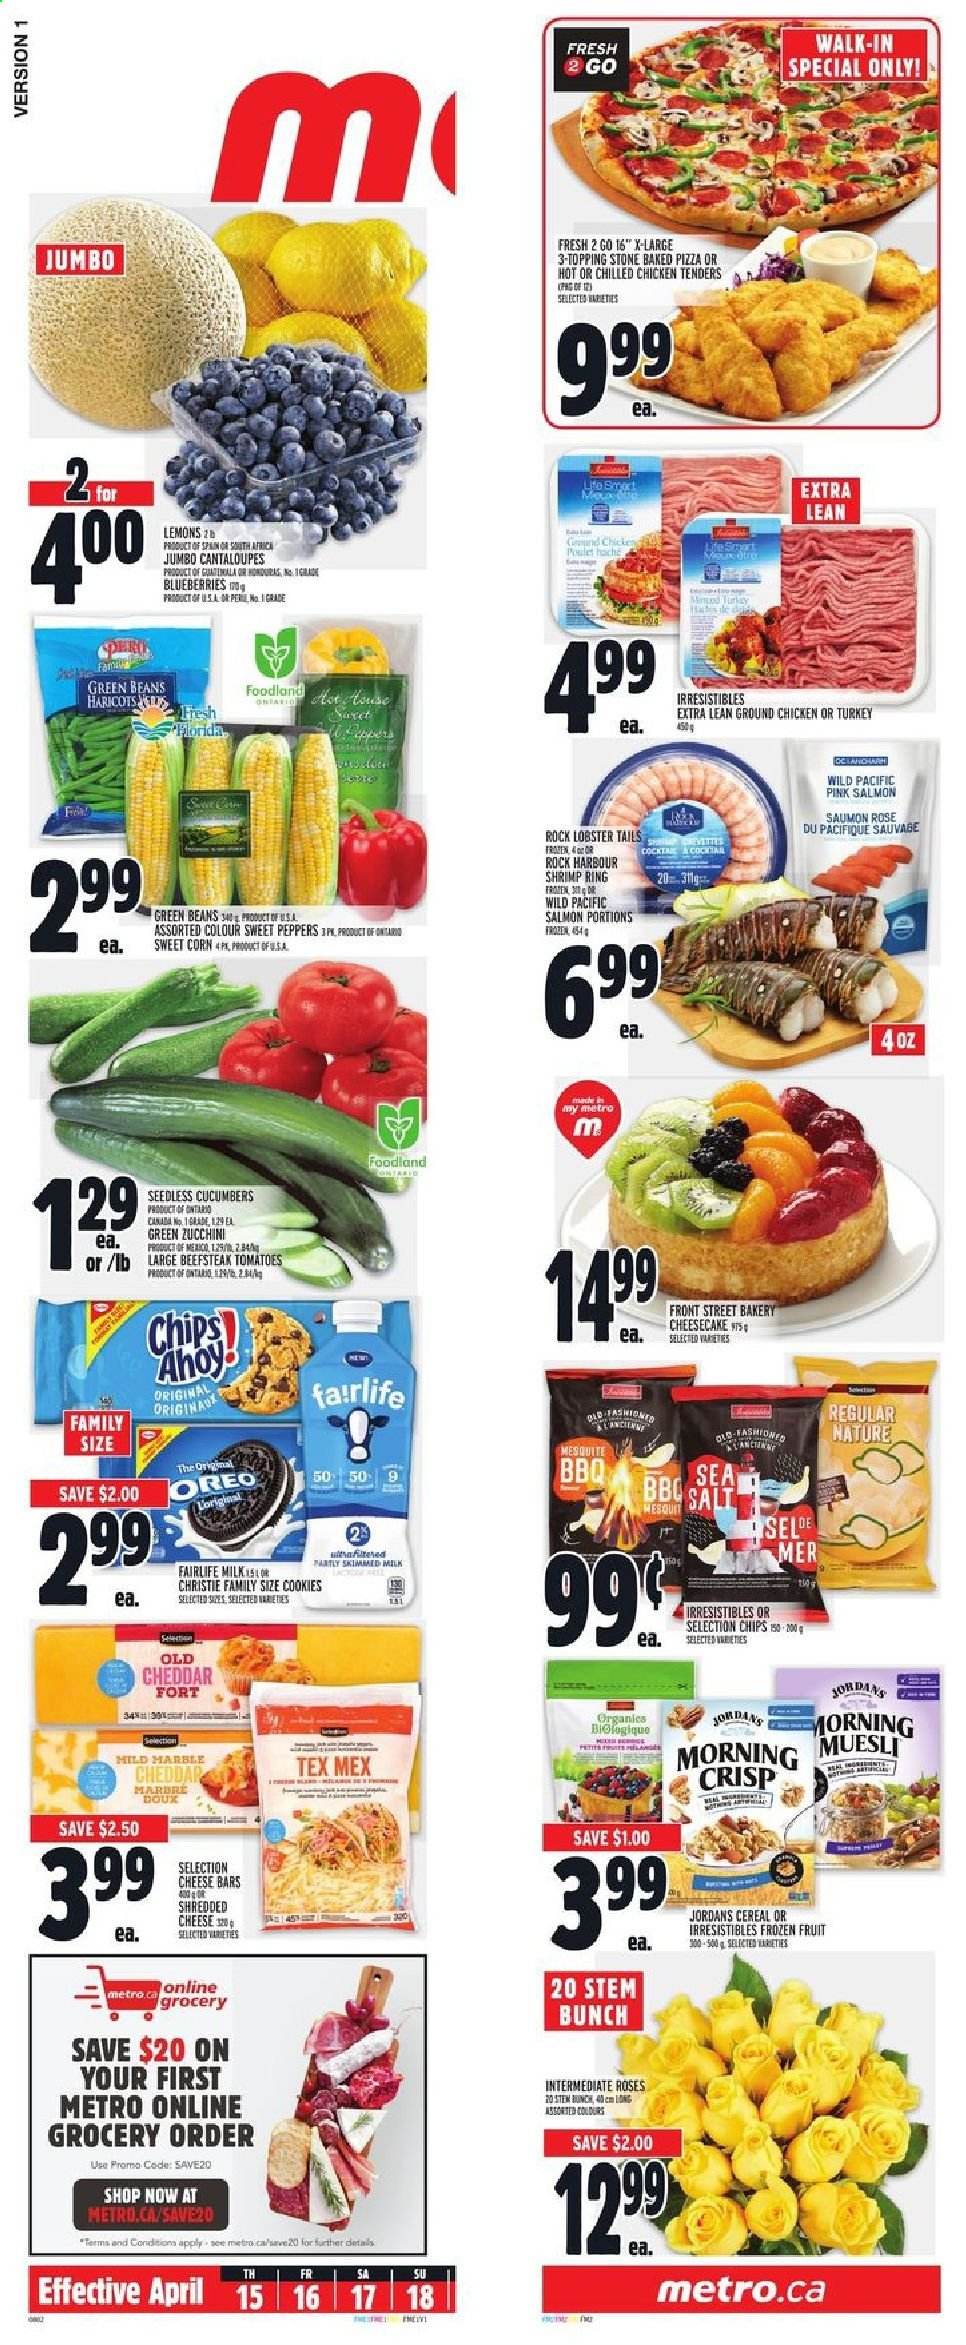 thumbnail - Metro Flyer - April 15, 2021 - April 21, 2021 - Sales products - cheesecake, beans, cantaloupe, corn, cucumber, green beans, sweet peppers, zucchini, peppers, sweet corn, blueberries, lemons, lobster, salmon, lobster tail, shrimps, pizza, chicken tenders, shredded cheese, milk, cookies, topping, cereals, muesli, rosé wine, ground chicken, chicken, rose, Oreo. Page 16.